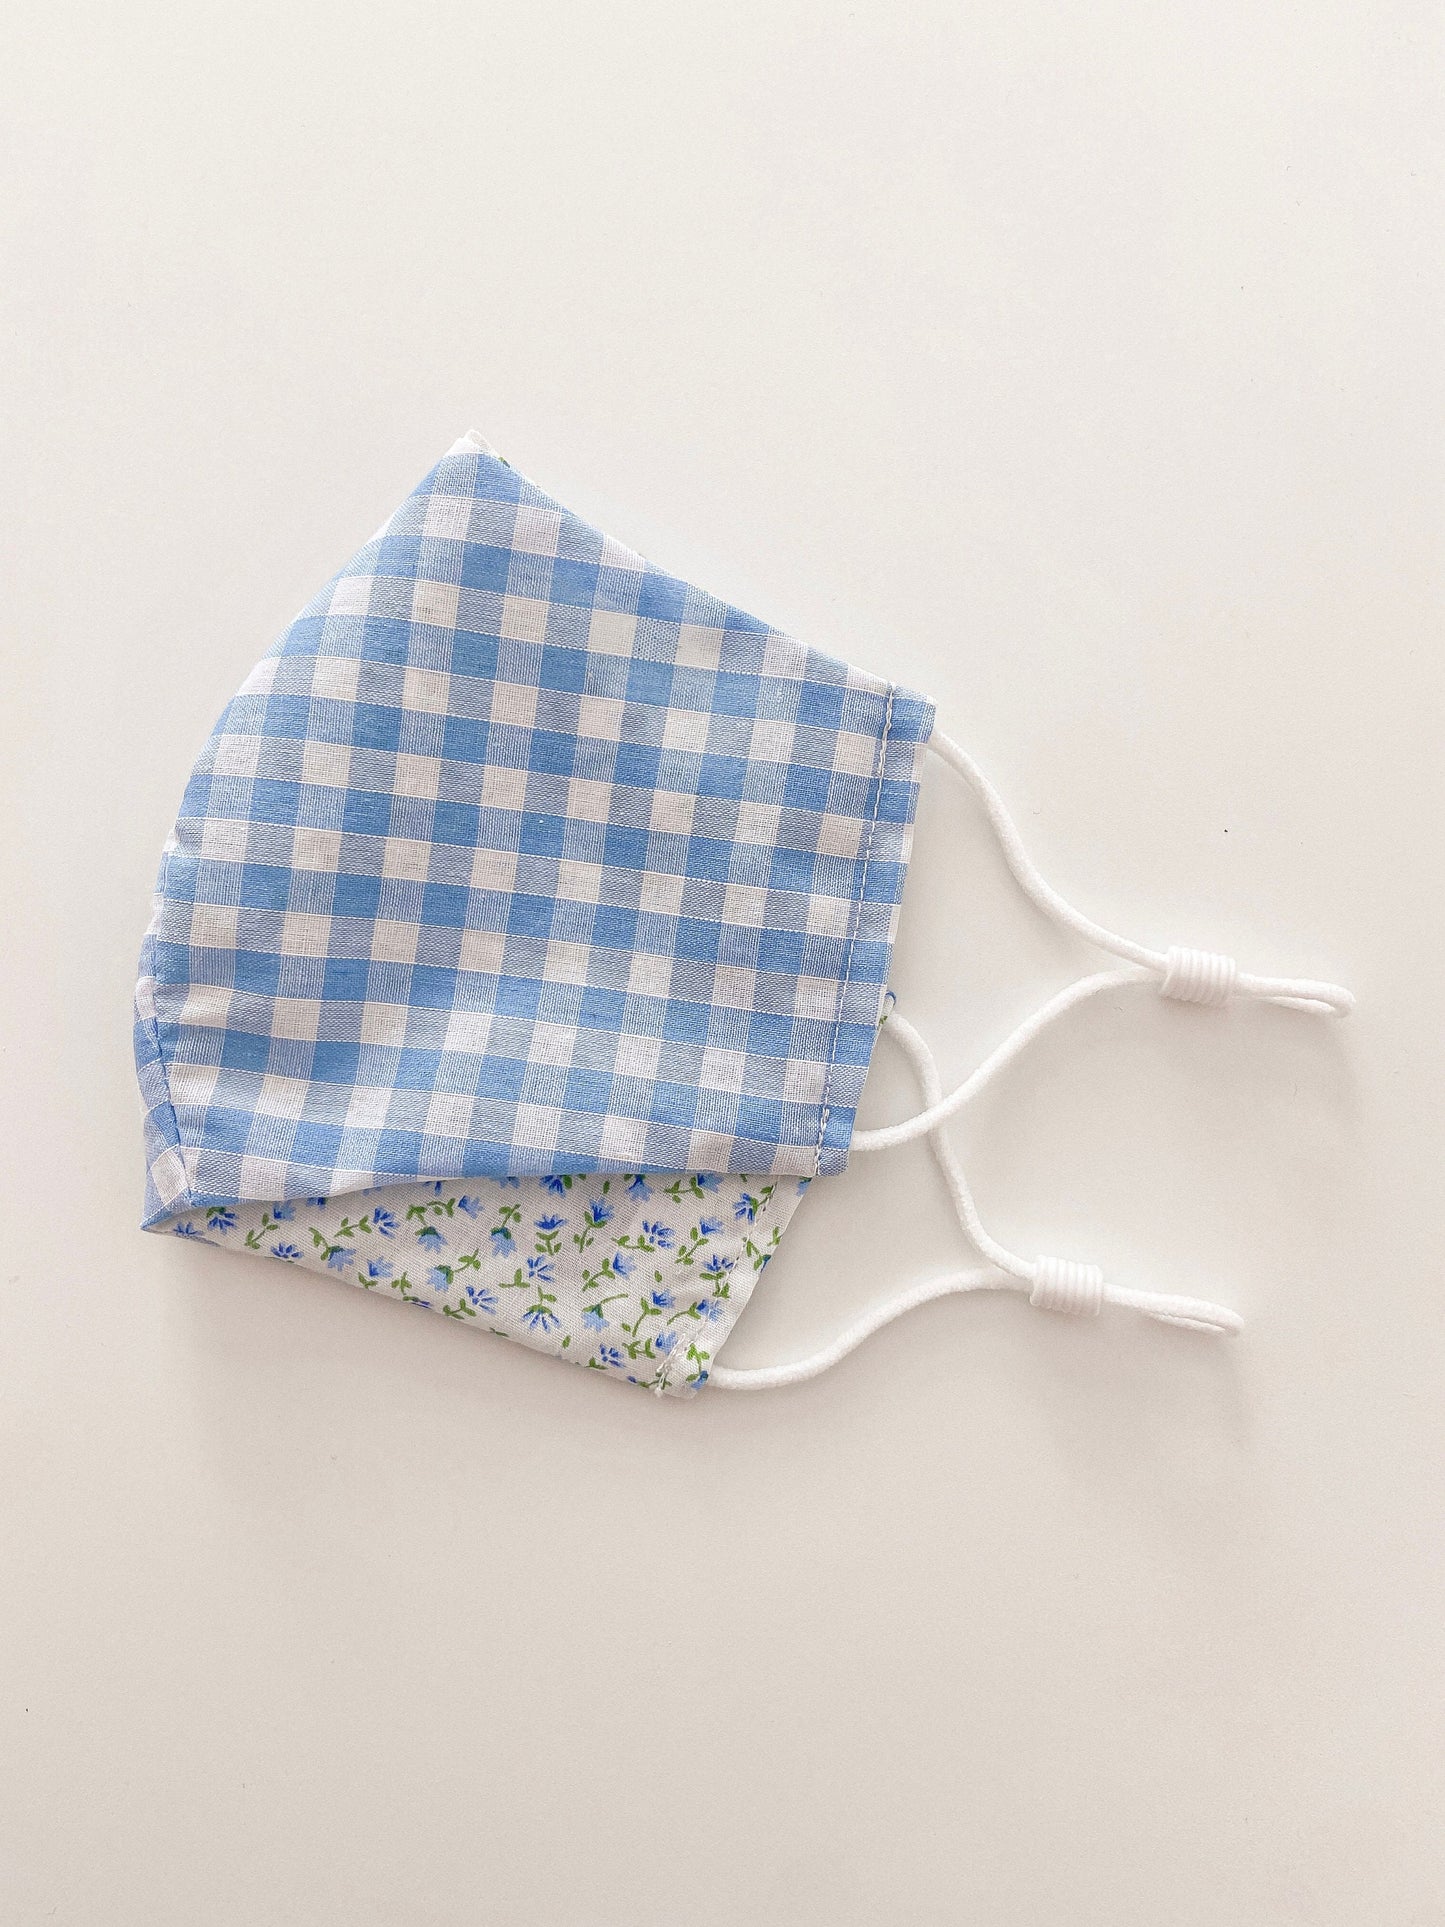 GINGHAM FLORAL REVERSIBLE 2 in 1 Mask Adjustable Super Soft Elastic. Washable Reusable homemade face mask and matching Scrunchy made in U.K.